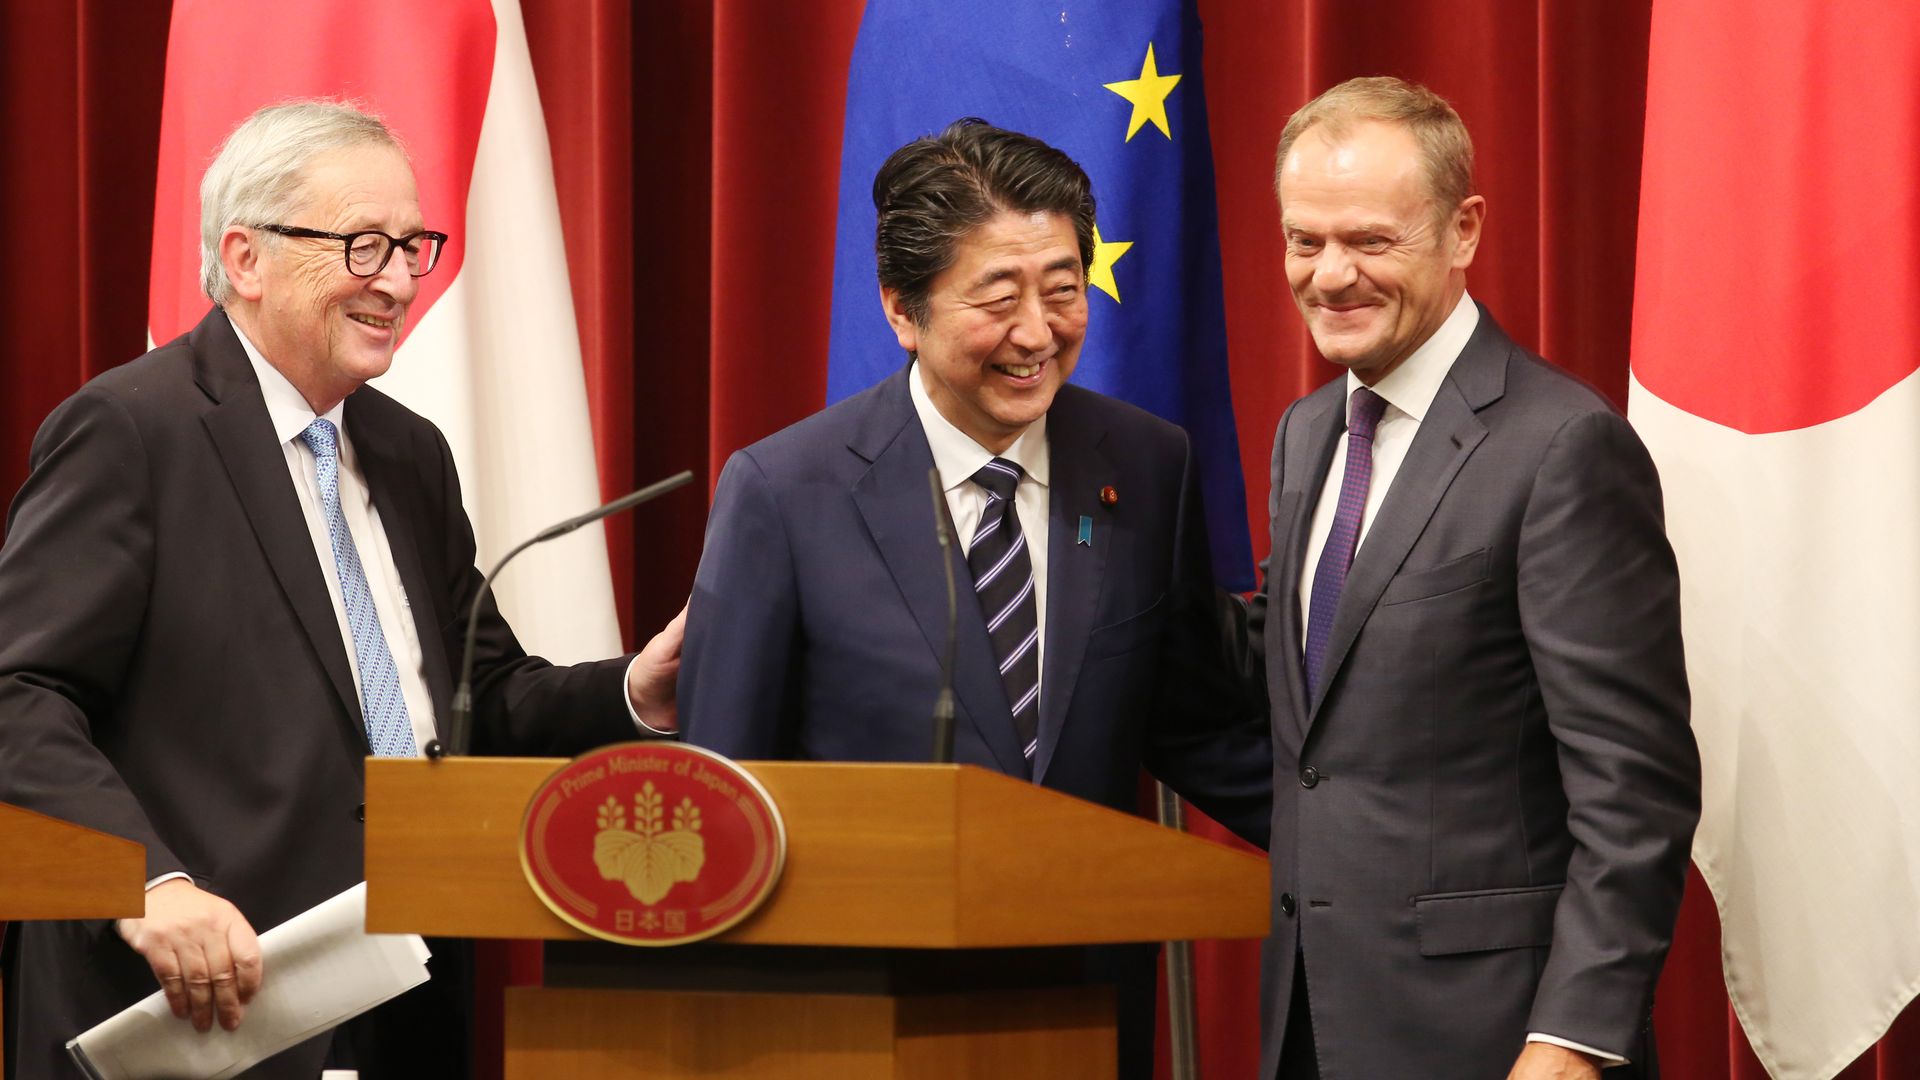 Japanese Prime Minister Shinzo Abe, European Commission President Jean-Claude Juncker and European Council President Donald Tusk at a joint press conference on the trade deal.  